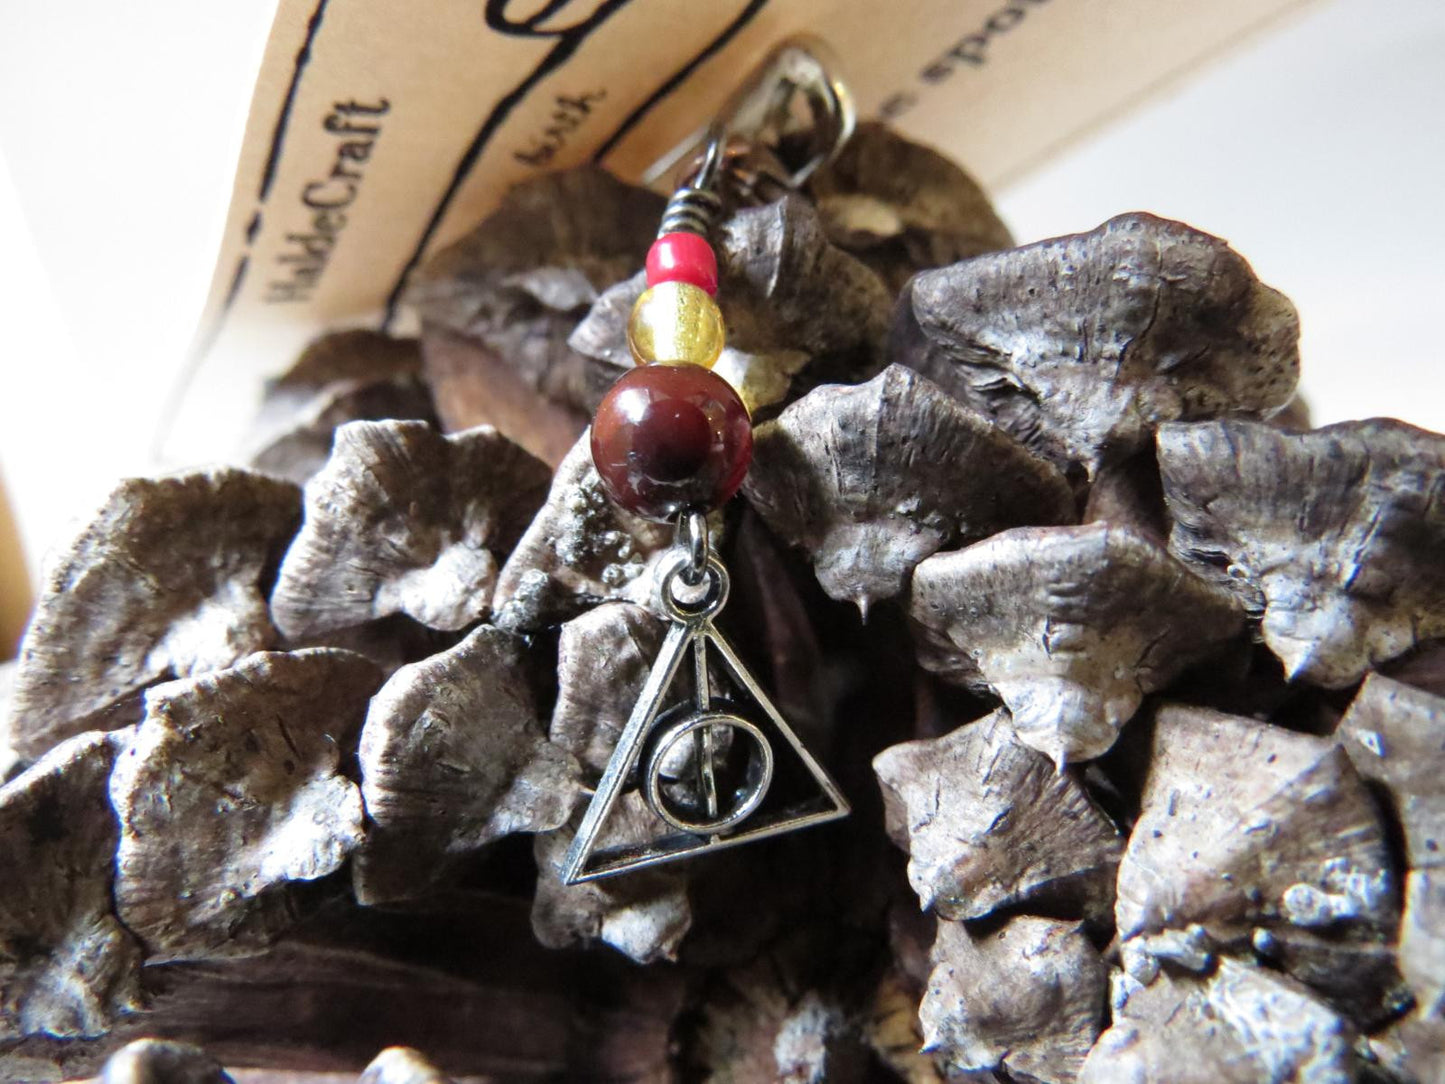 Deathly Hallows stitch marker set in maroon and gold